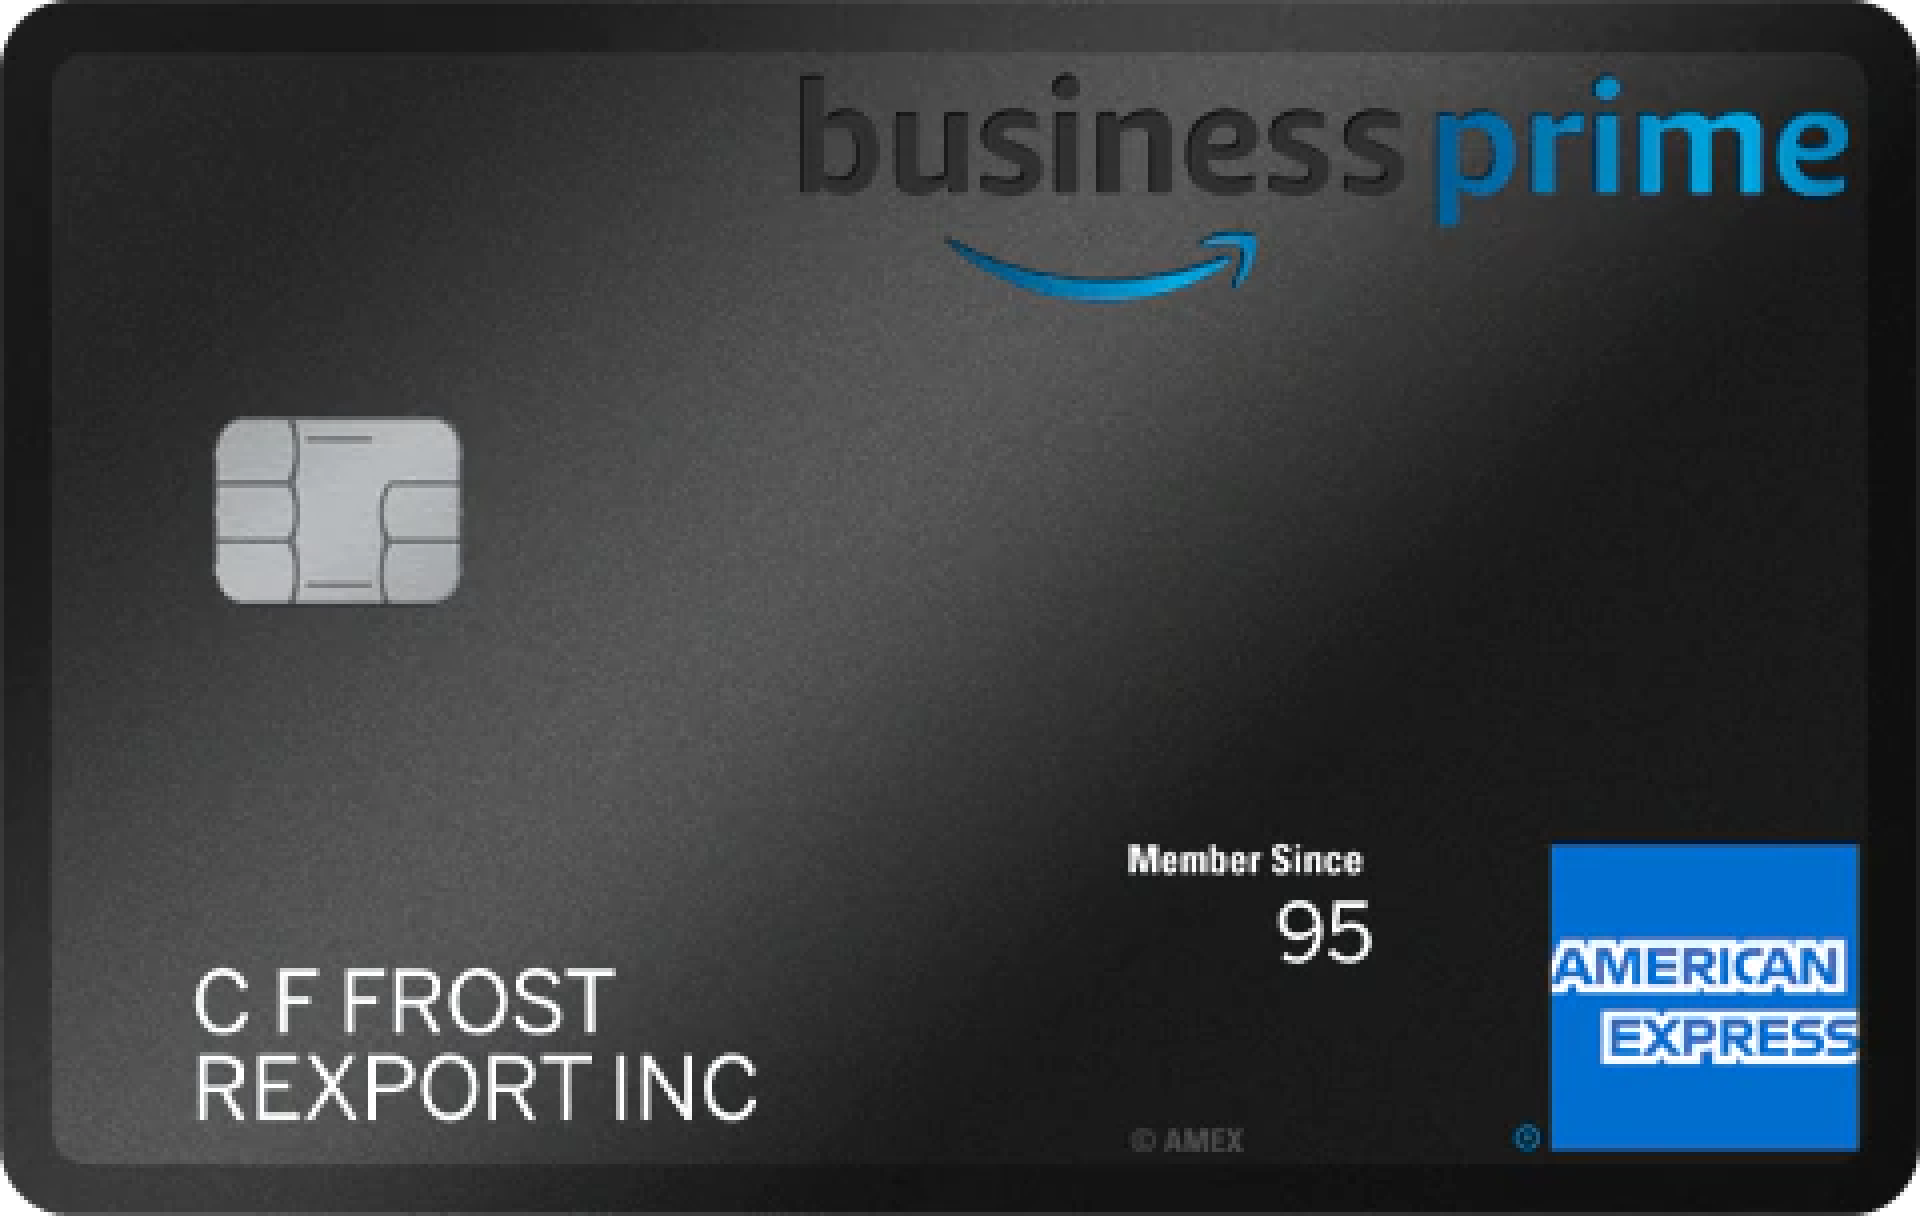 credit card art for: The Amazon Prime Business American Express Card